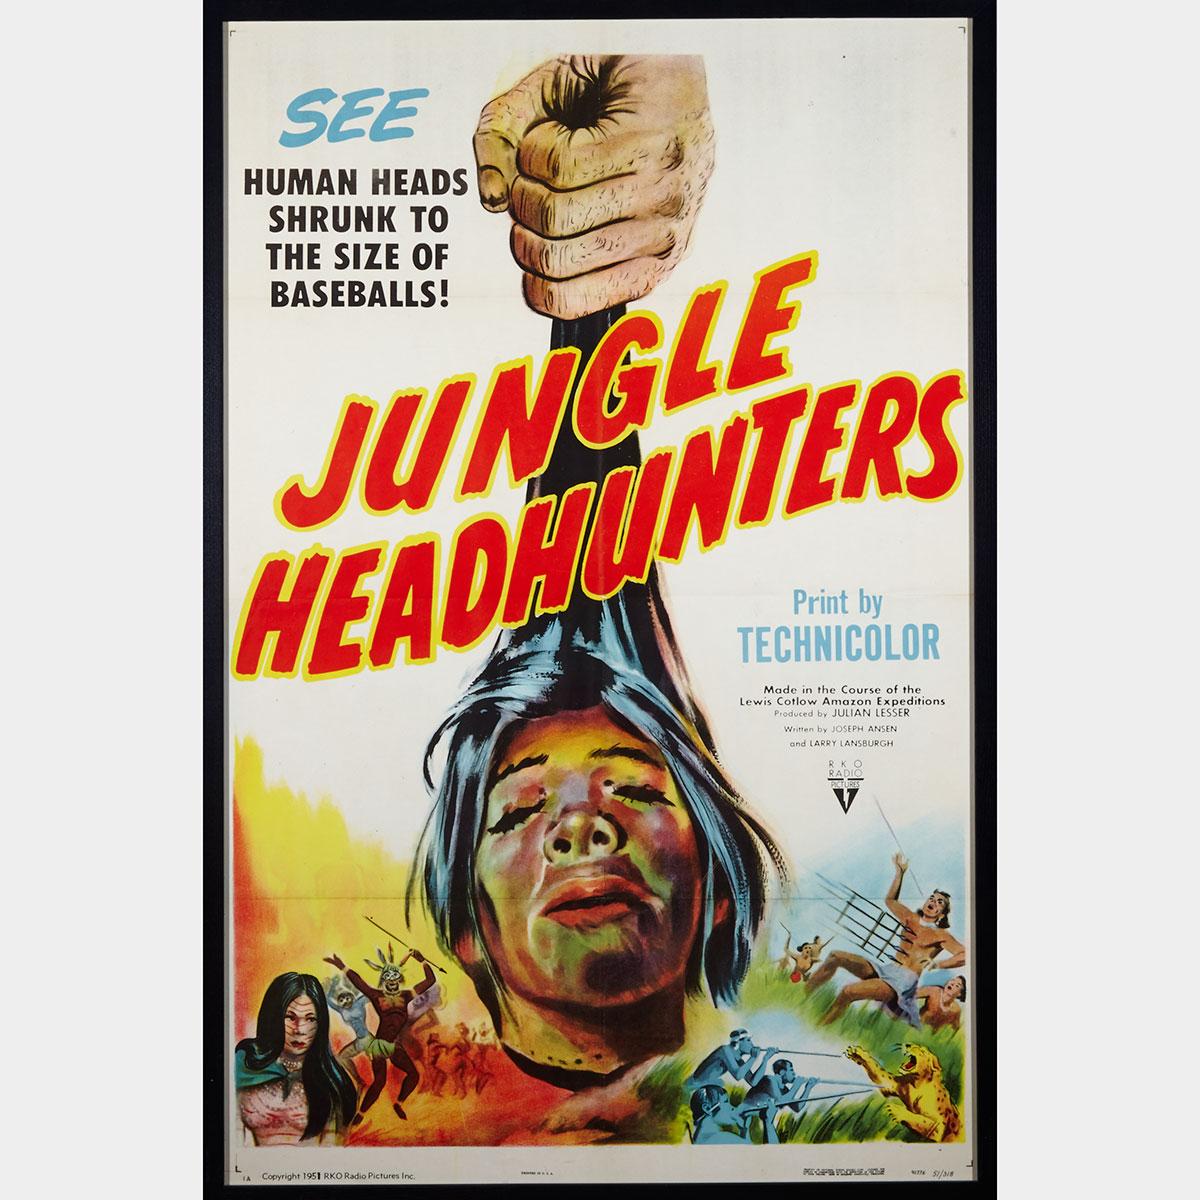 American Chromolithograph One Sheet Movie Poster for ‘Jungle Headhunters’, 1951